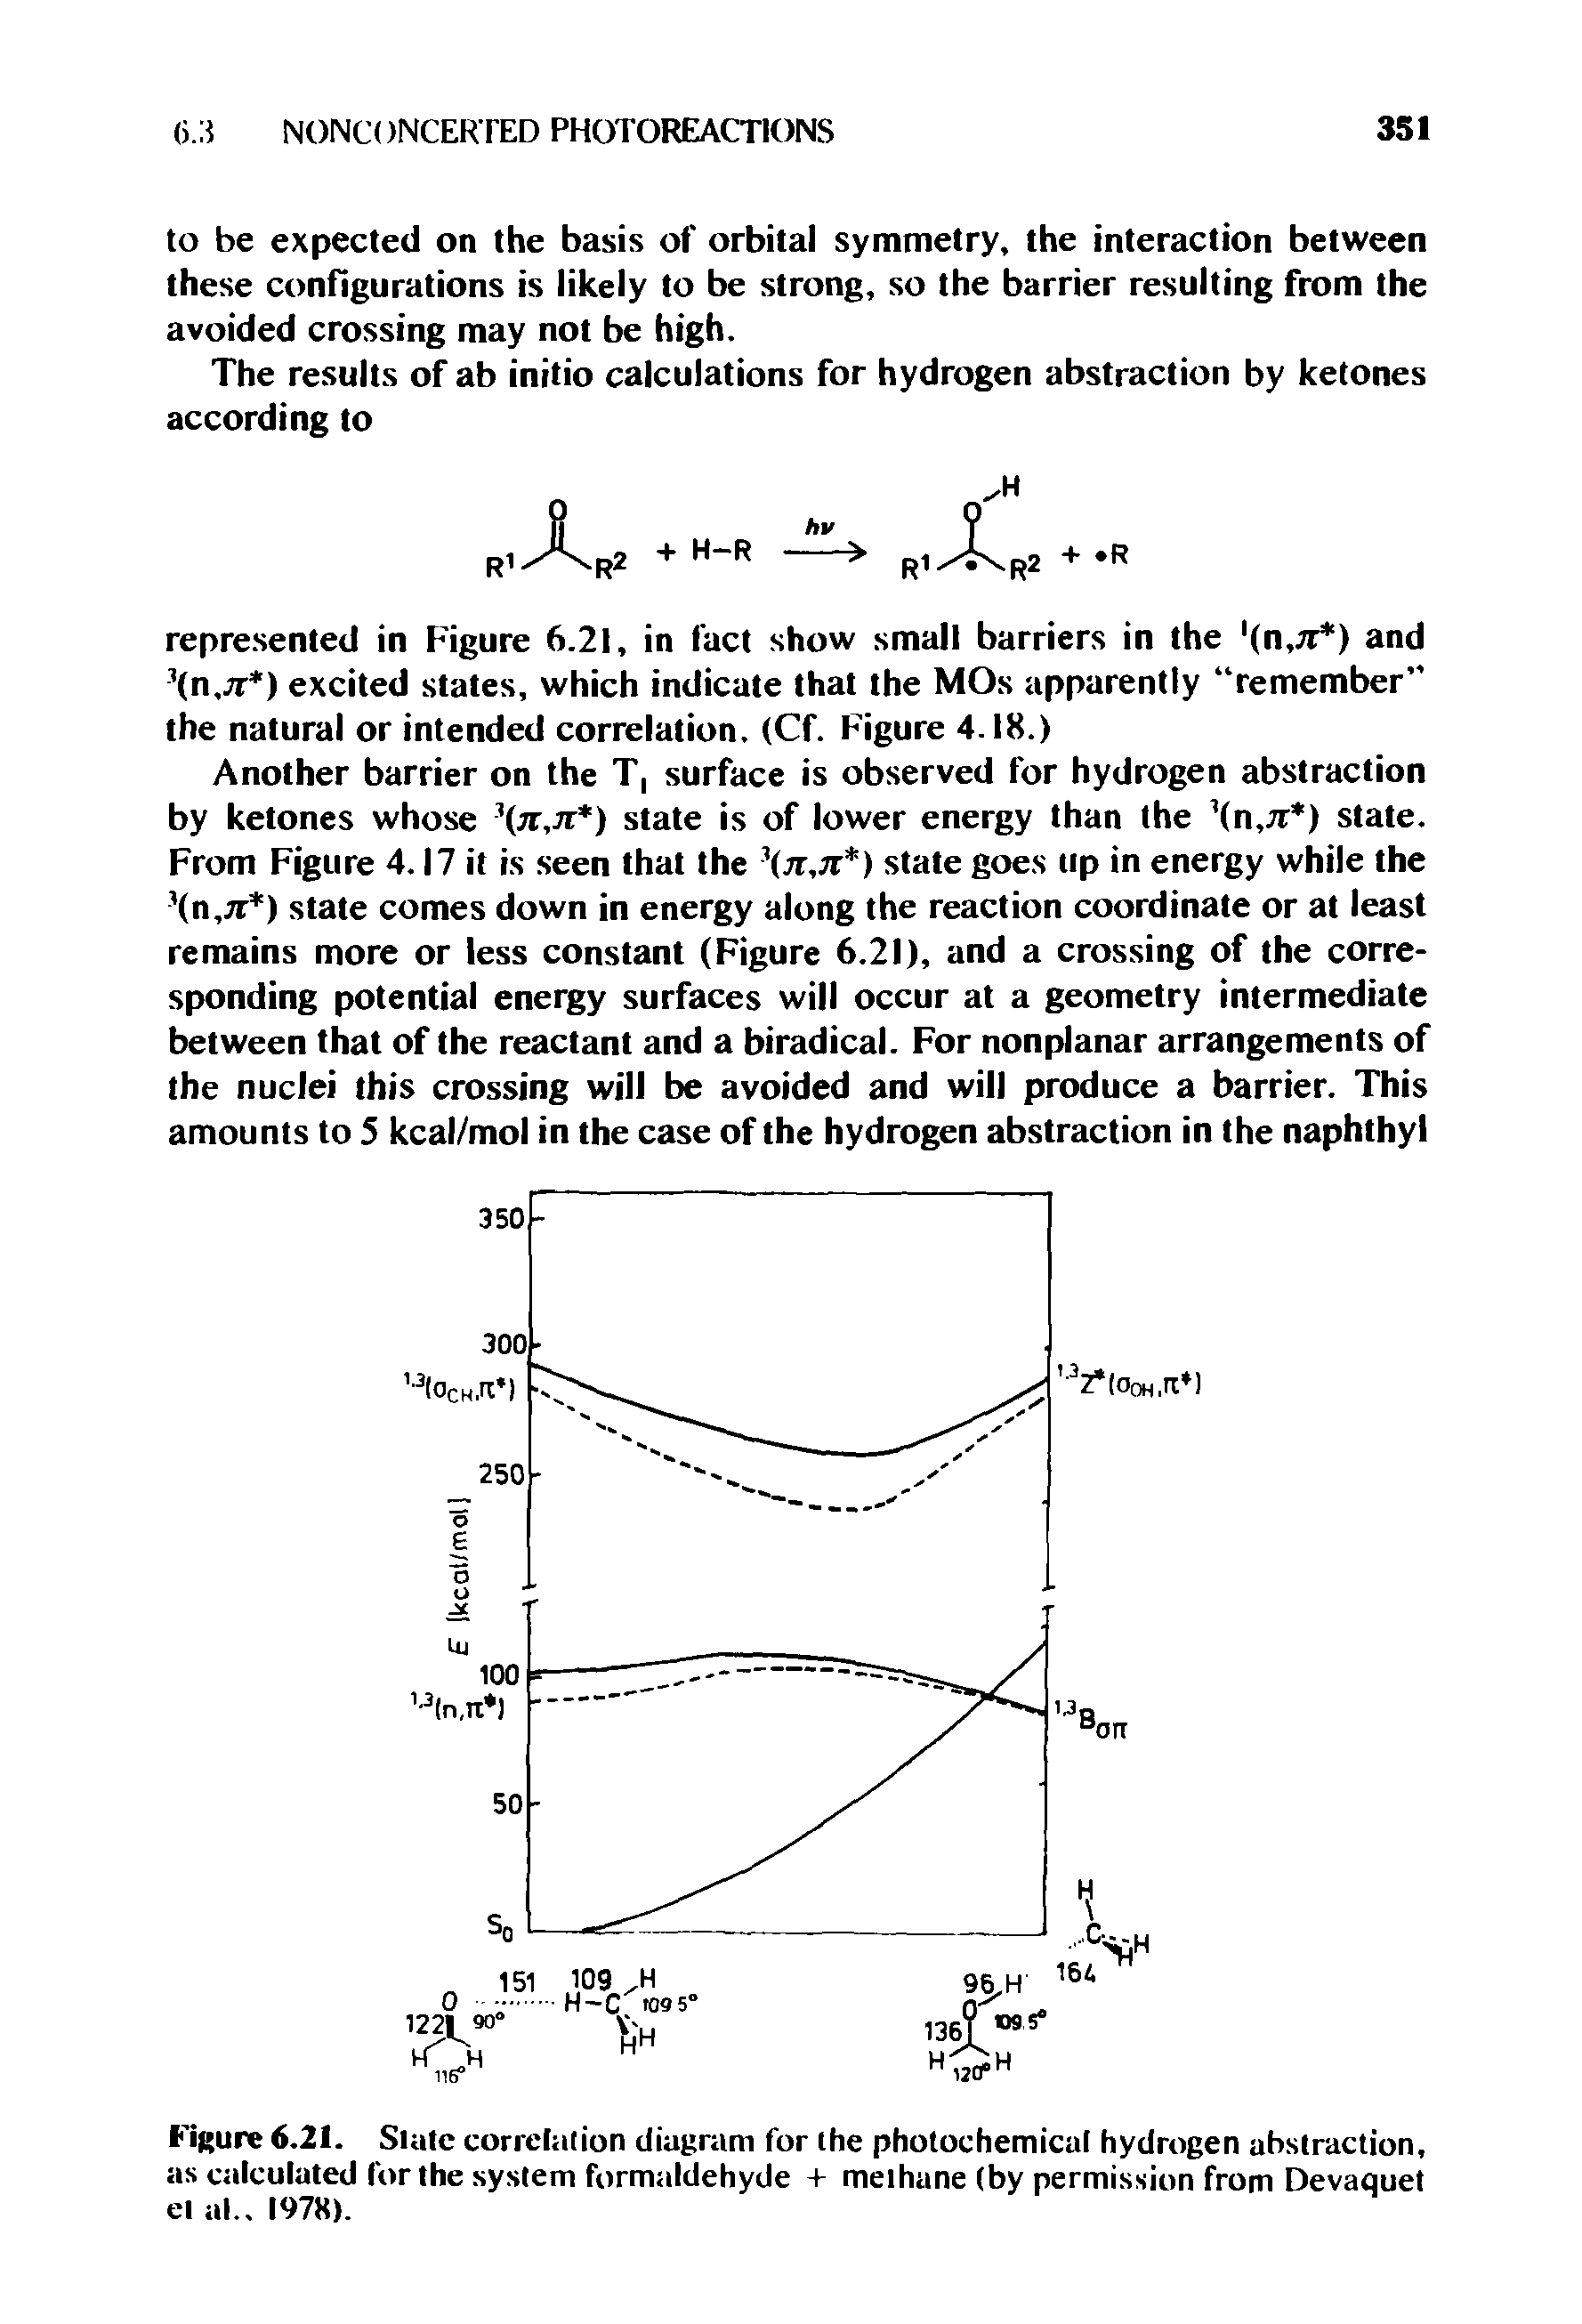 Figure 6.21. Slate correlation diagram for ihe photochemical hydrogen abstraction, as calculated for Ihe system formaldehyde + methane (by permission from Devaquet el al., 1978).